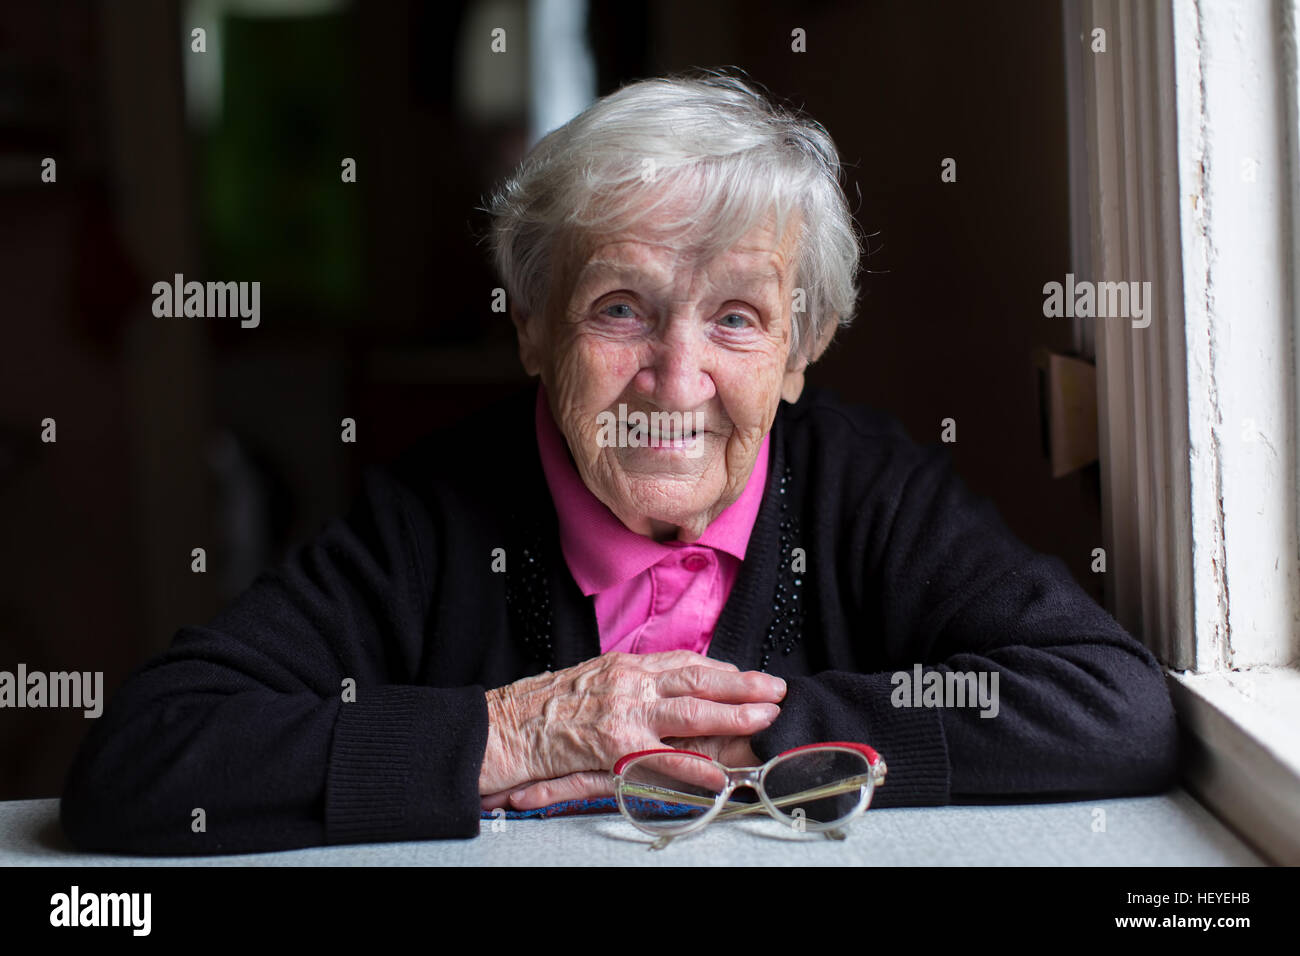 Old woman in her home, looking into the camera. Stock Photo